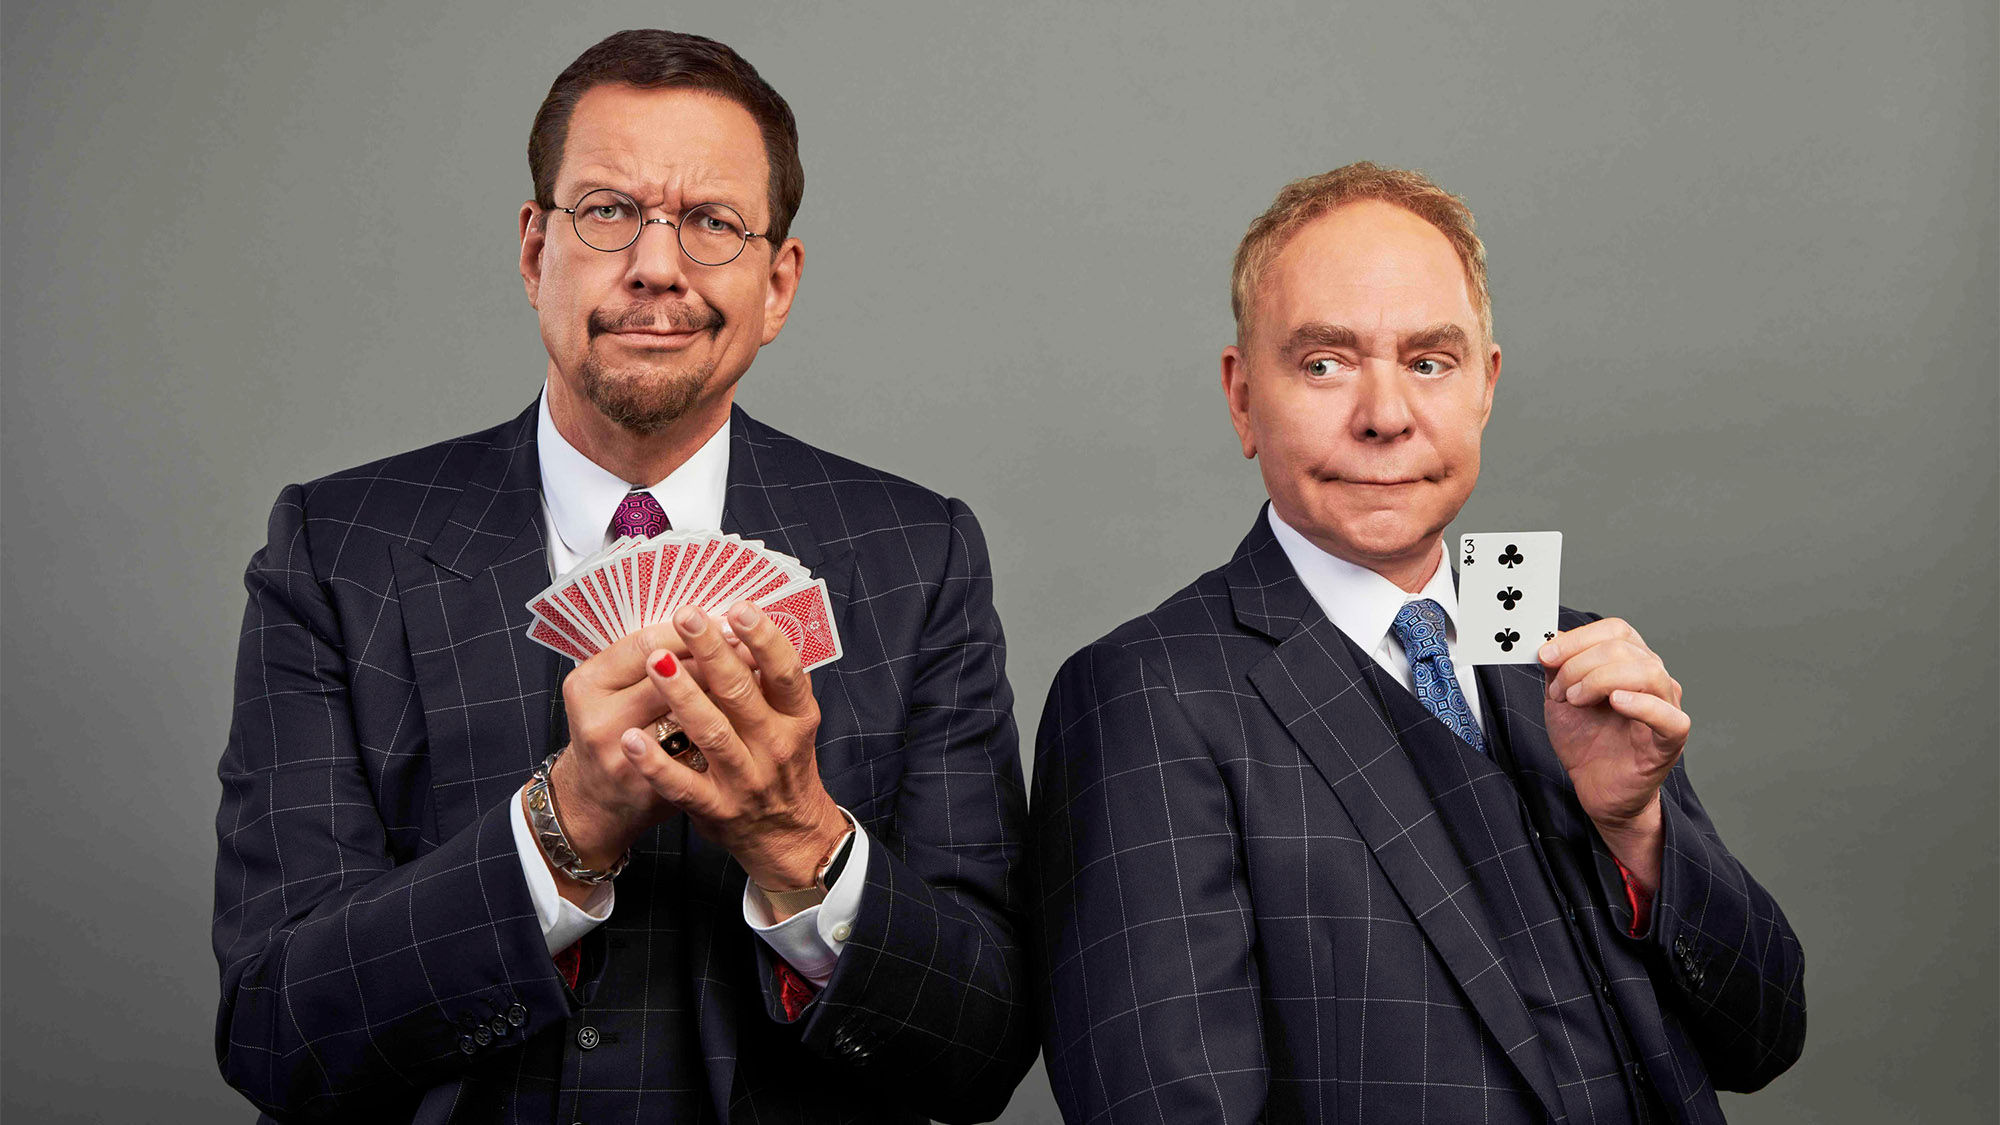 The legendary magic and comedy duo Penn & Teller have performed at the Rio for more two decades and will continue to do so through 2026.